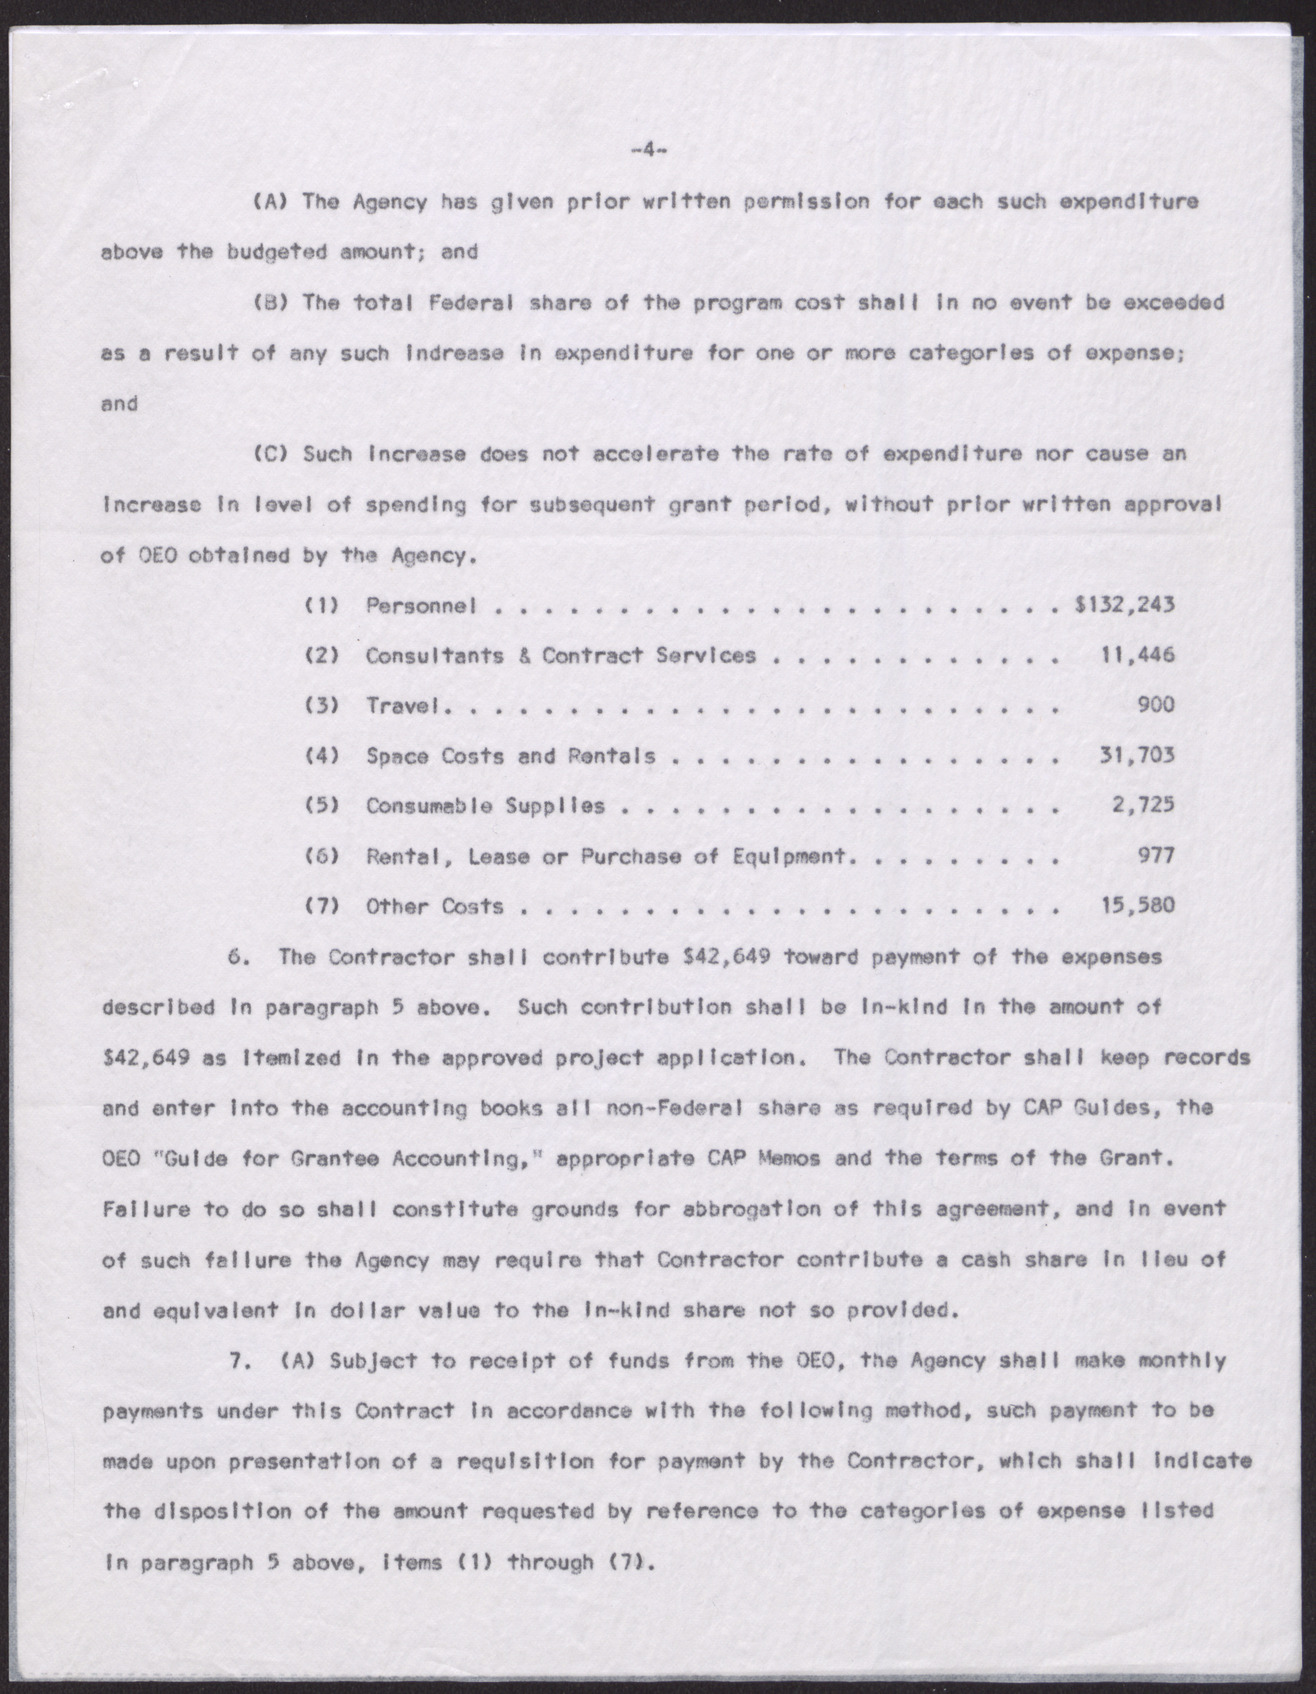 Contract of agreement between the EOB ad Operation Independence, Inc. (6 pages), January 1, 1968, page 4